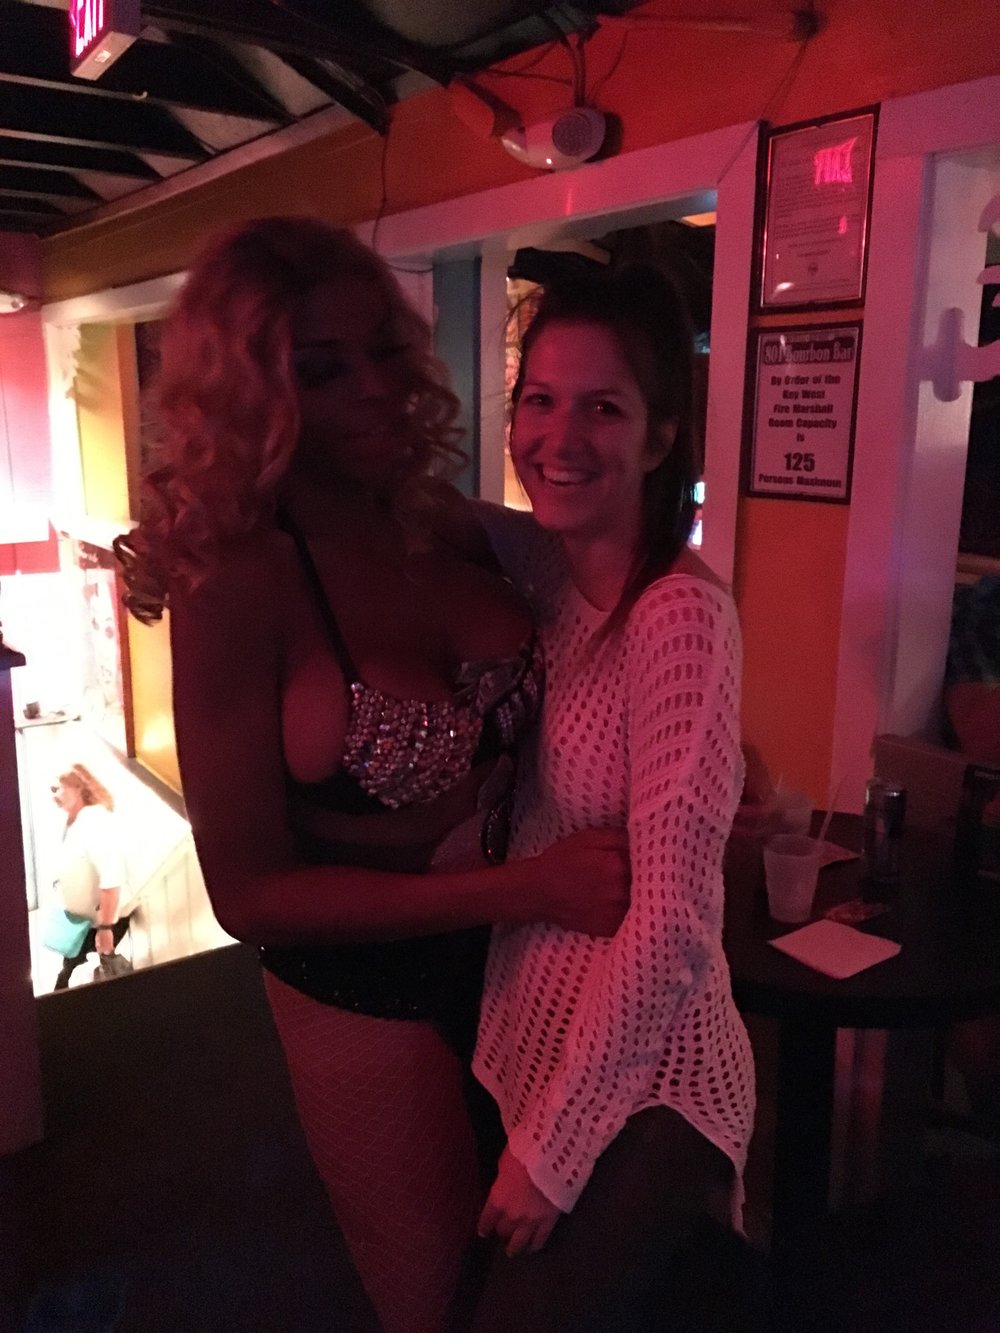  Alessandra Torre with drag queen at 801 Bourbon Street in Key West 